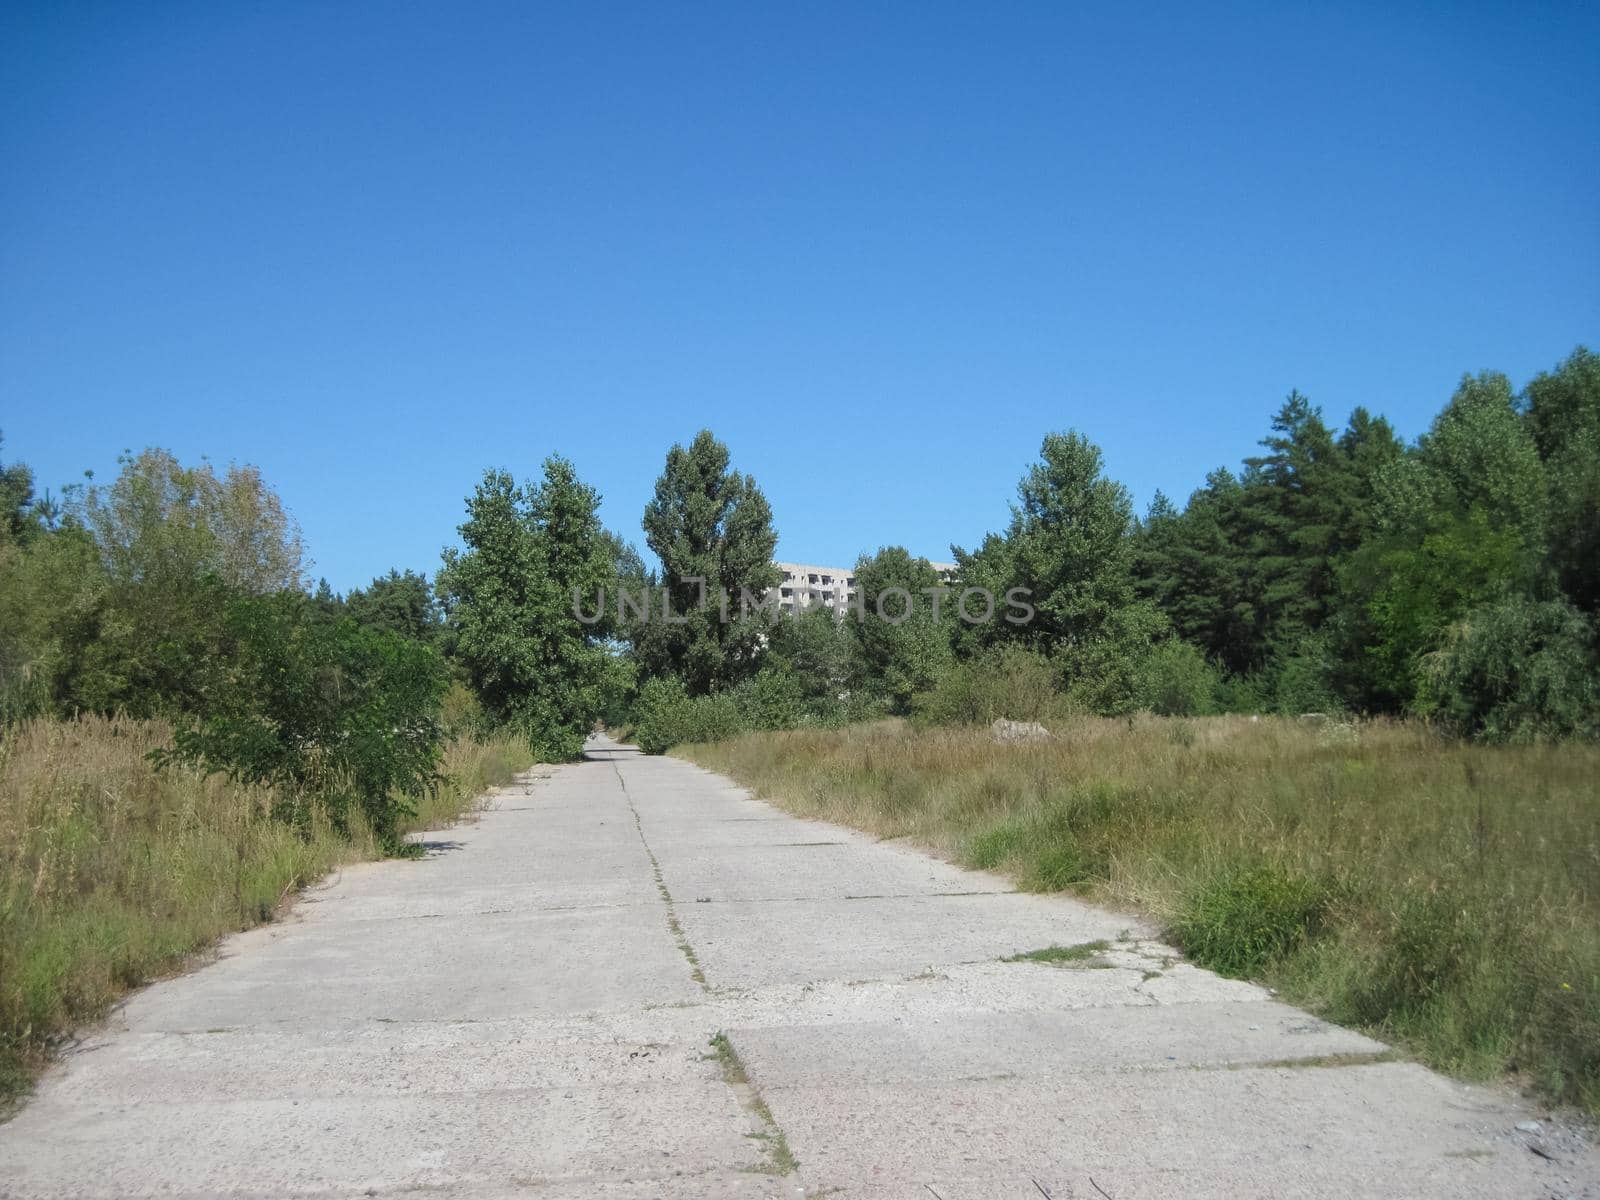 The old road is made of concrete slabs. road surface slabs of concrete.